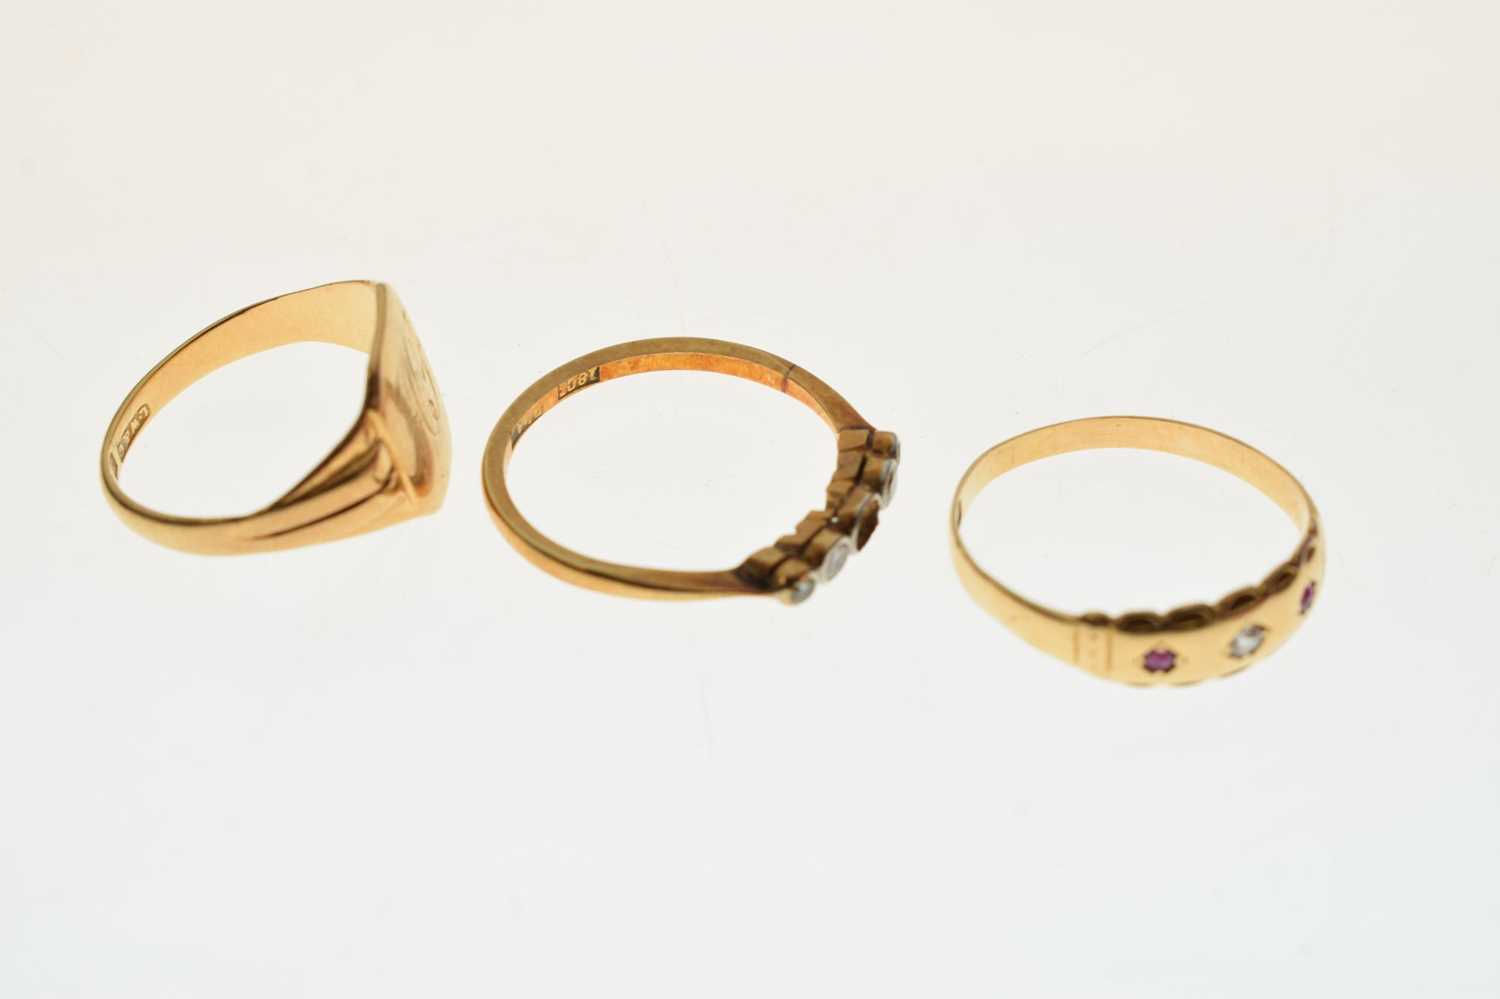 Three 18ct gold rings - Image 5 of 8